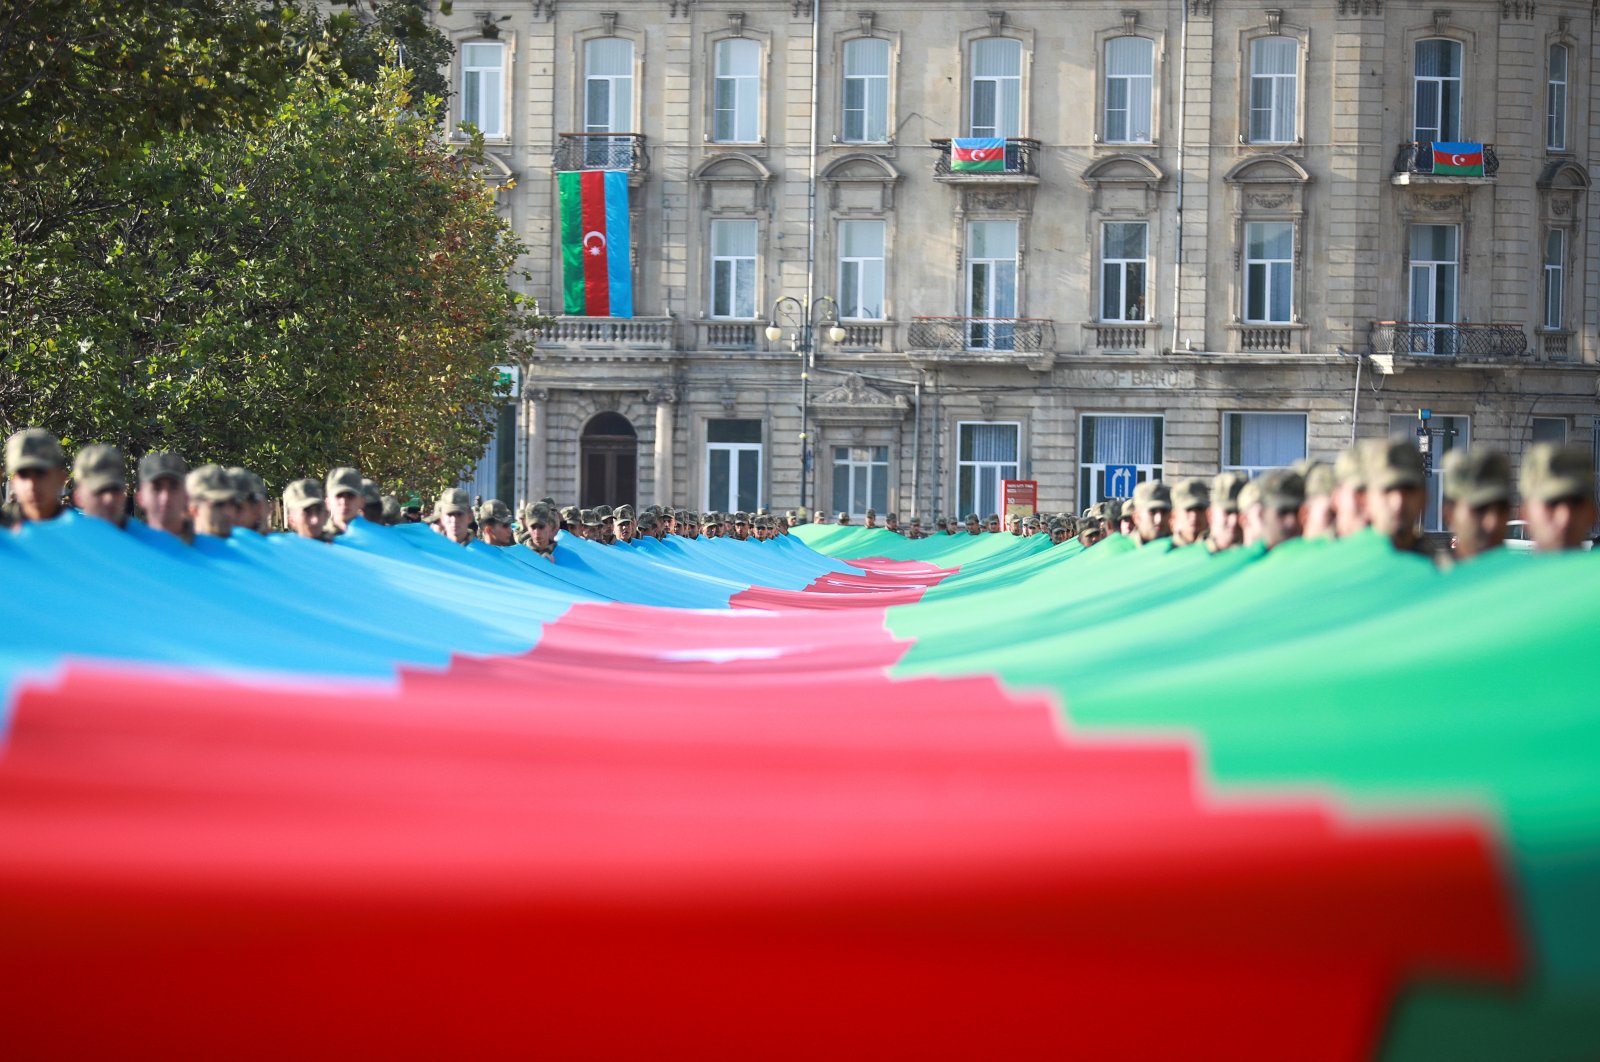 Azerbaijani service members carry a giant flag during a procession marking the anniversary of the end of the 2020 military conflict over Nagorno-Karabakh from Armenian occupation, Nov. 8, 2021. (Reuters File Photo)